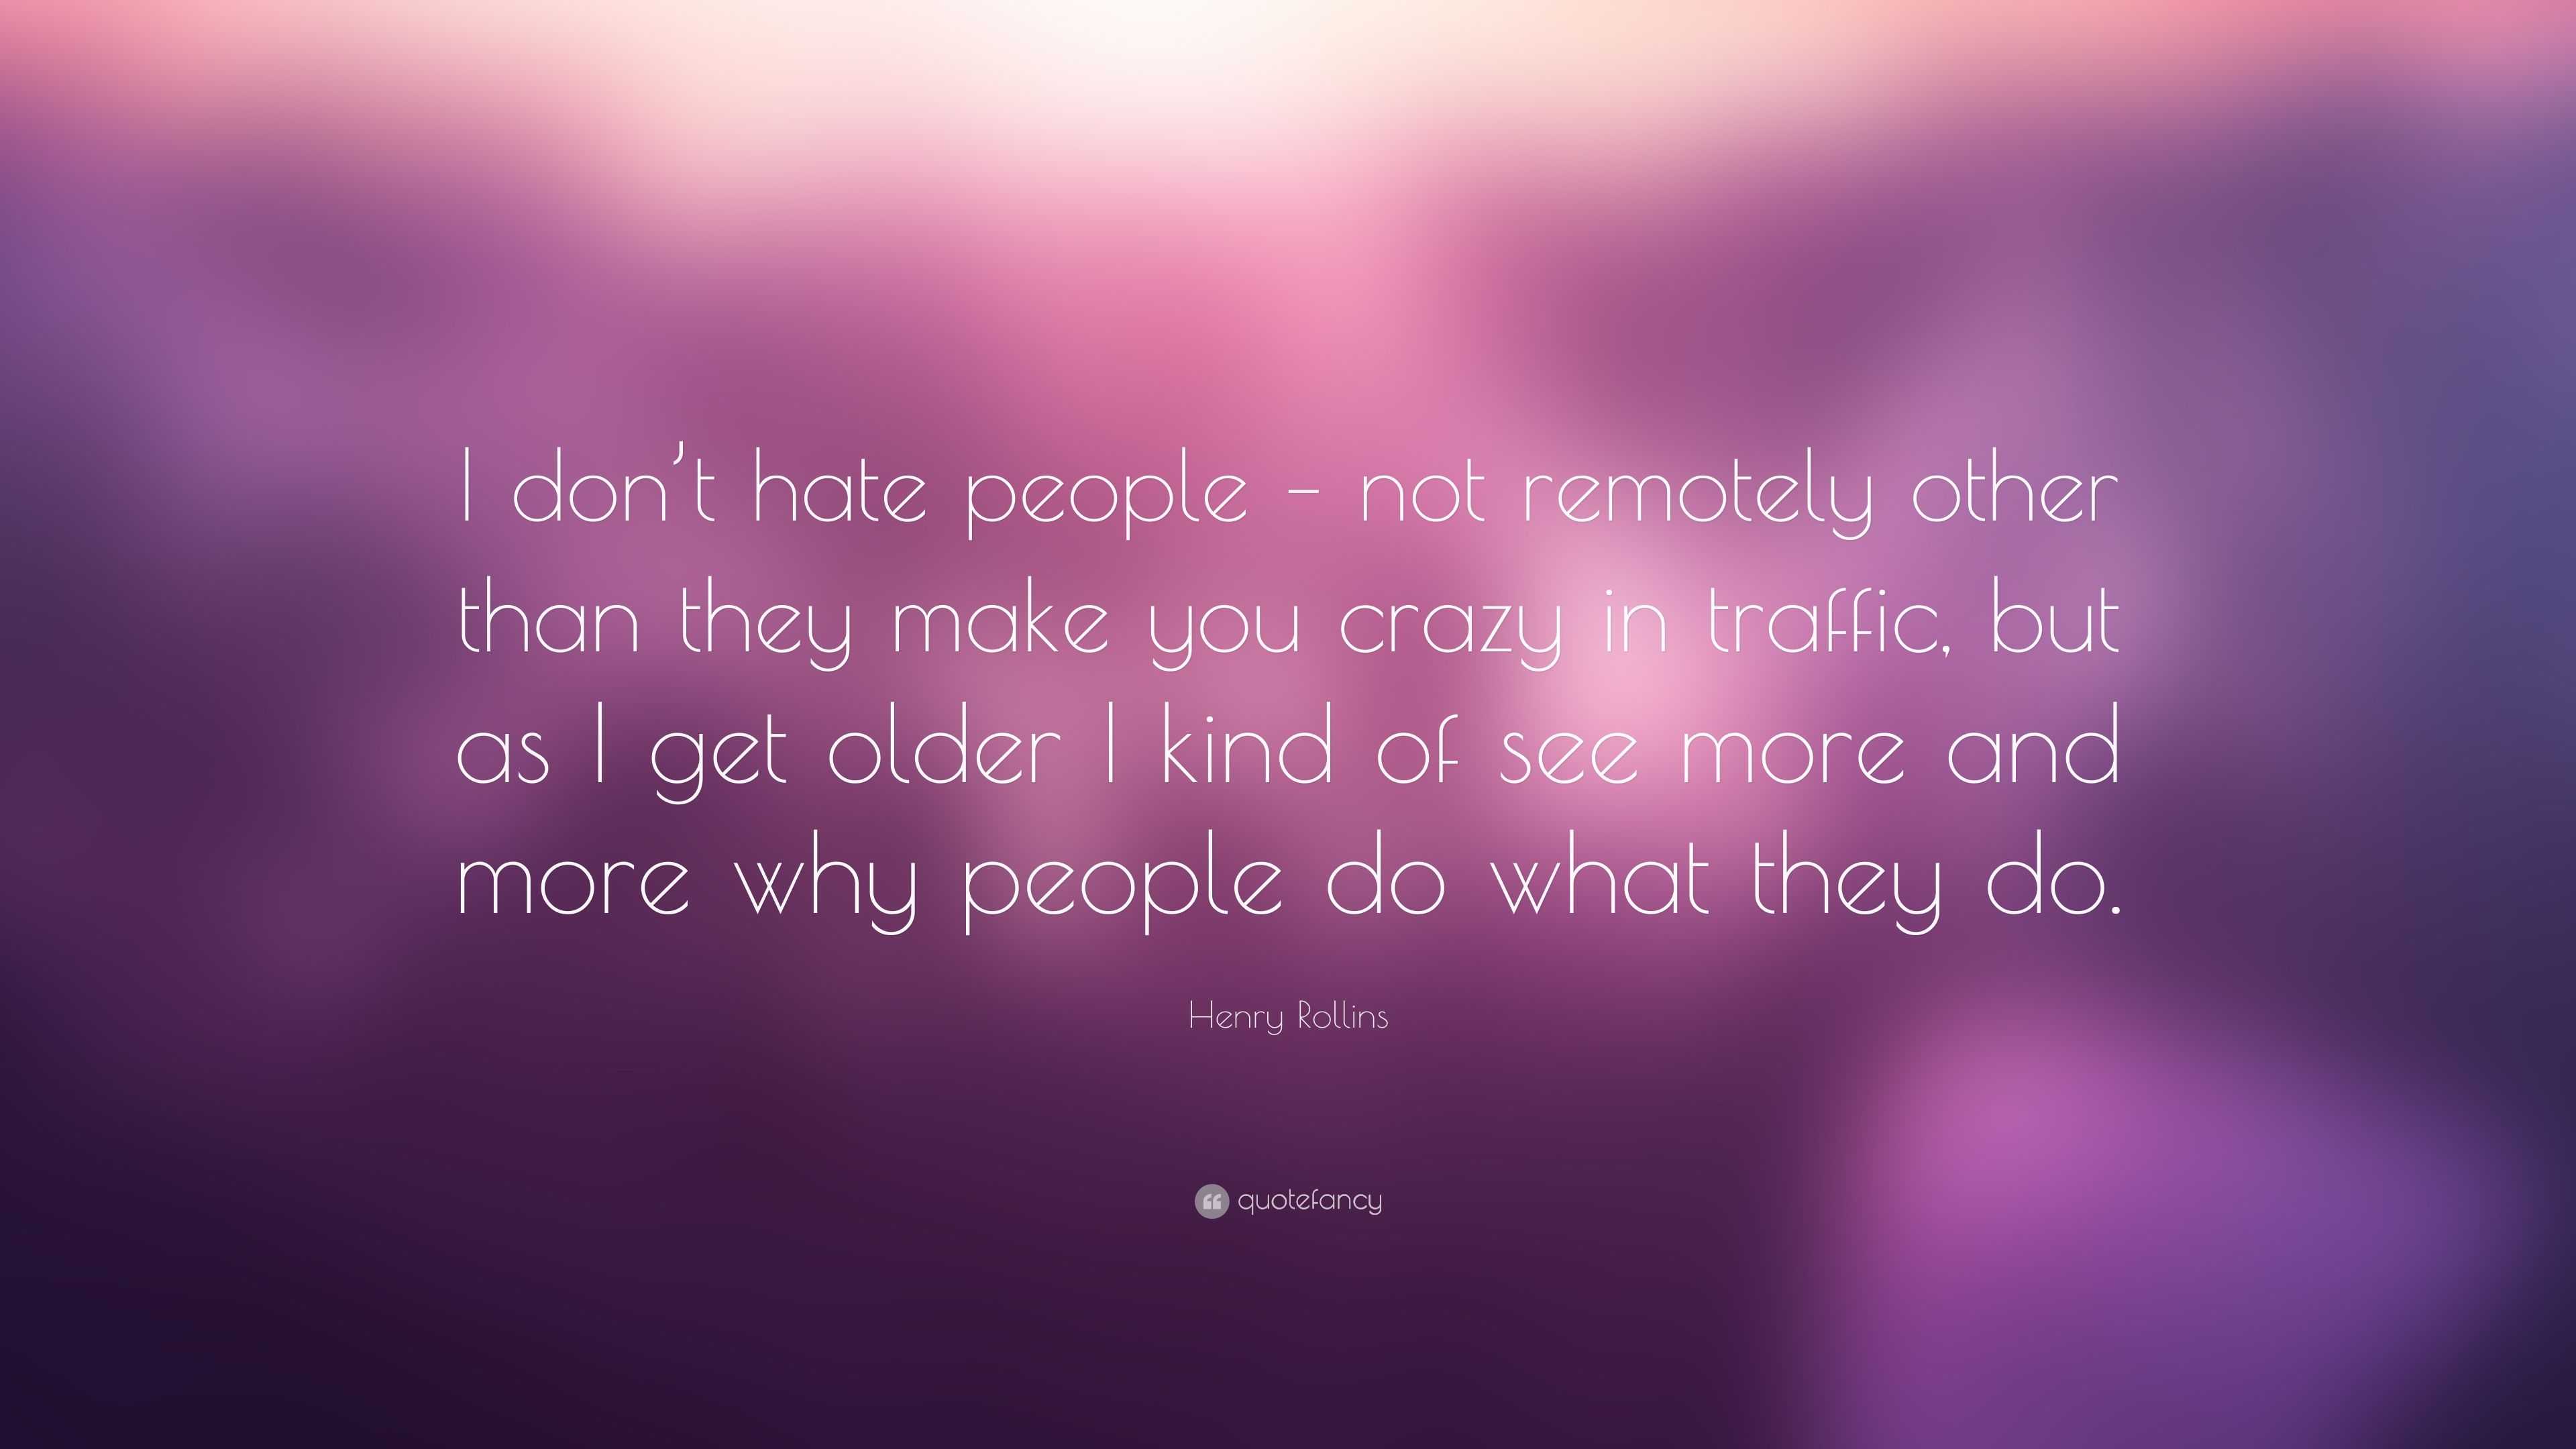 Henry Rollins Quote: “I don’t hate people – not remotely other than ...